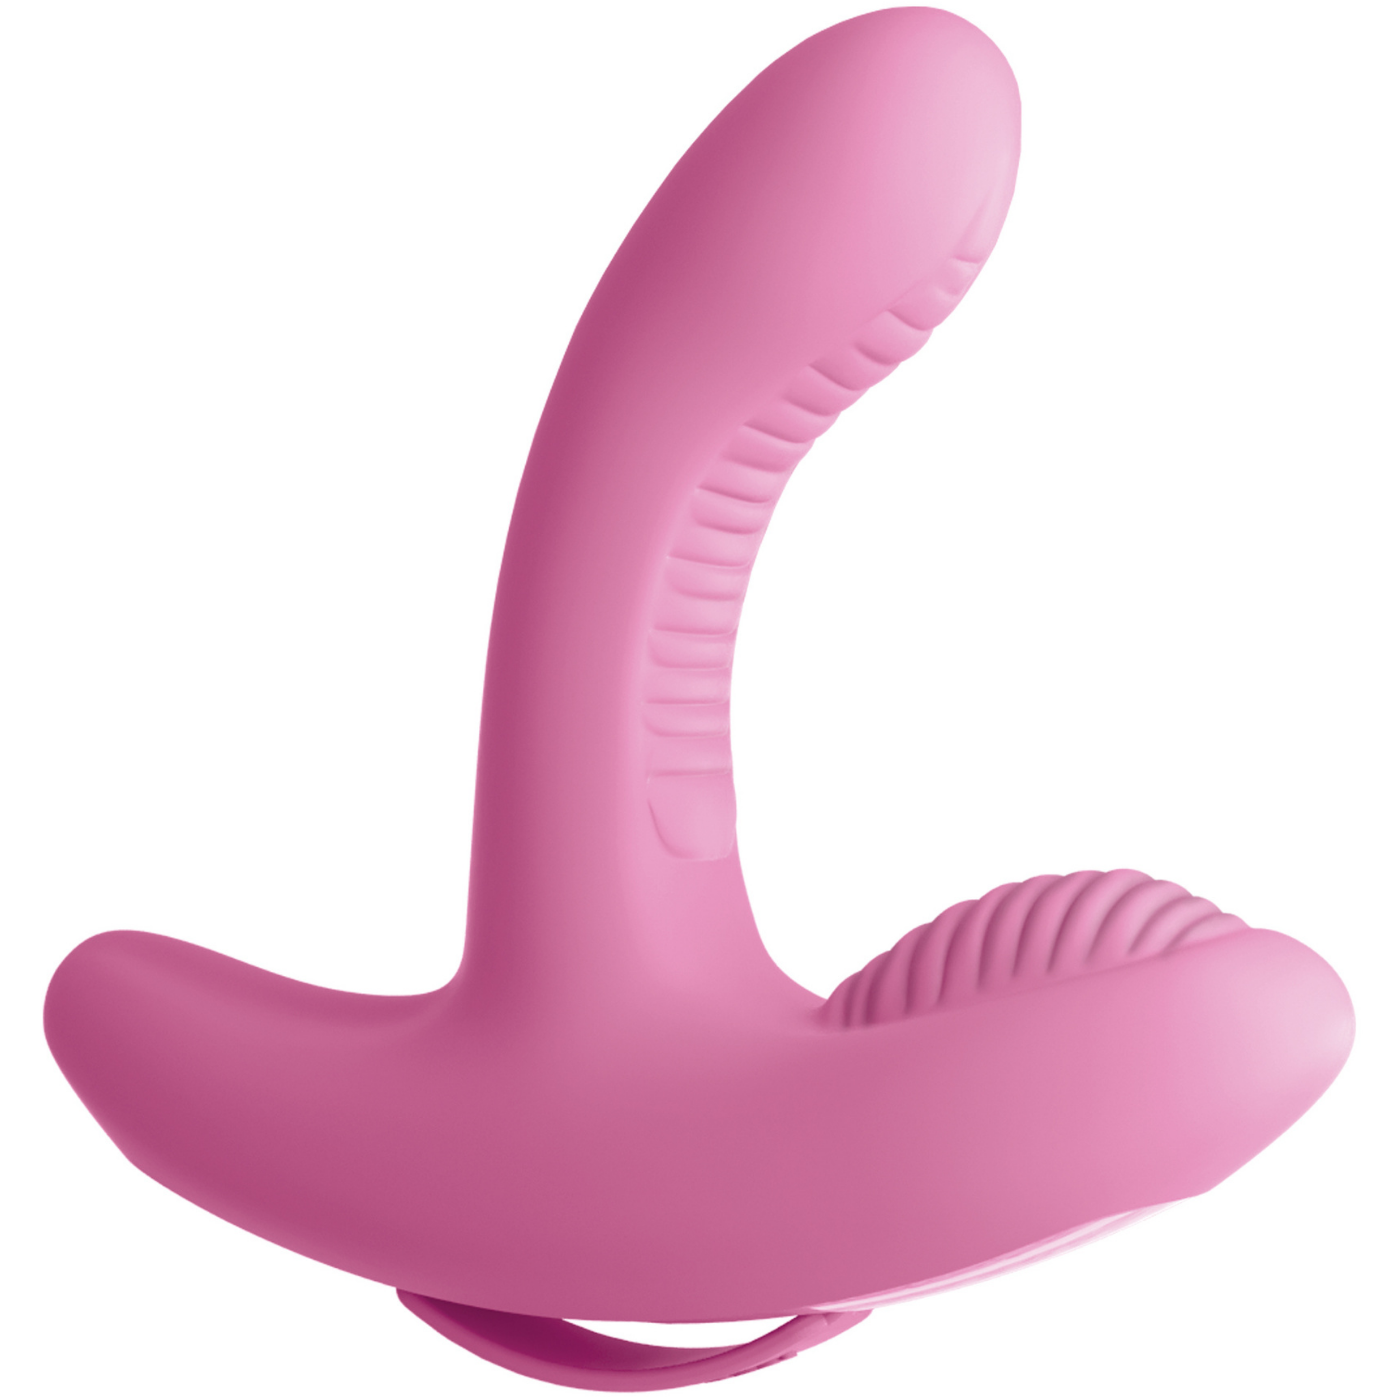 3Some Sit & Rock Hands-Free Vibrator | Clit and G-Spot-BestGSpot